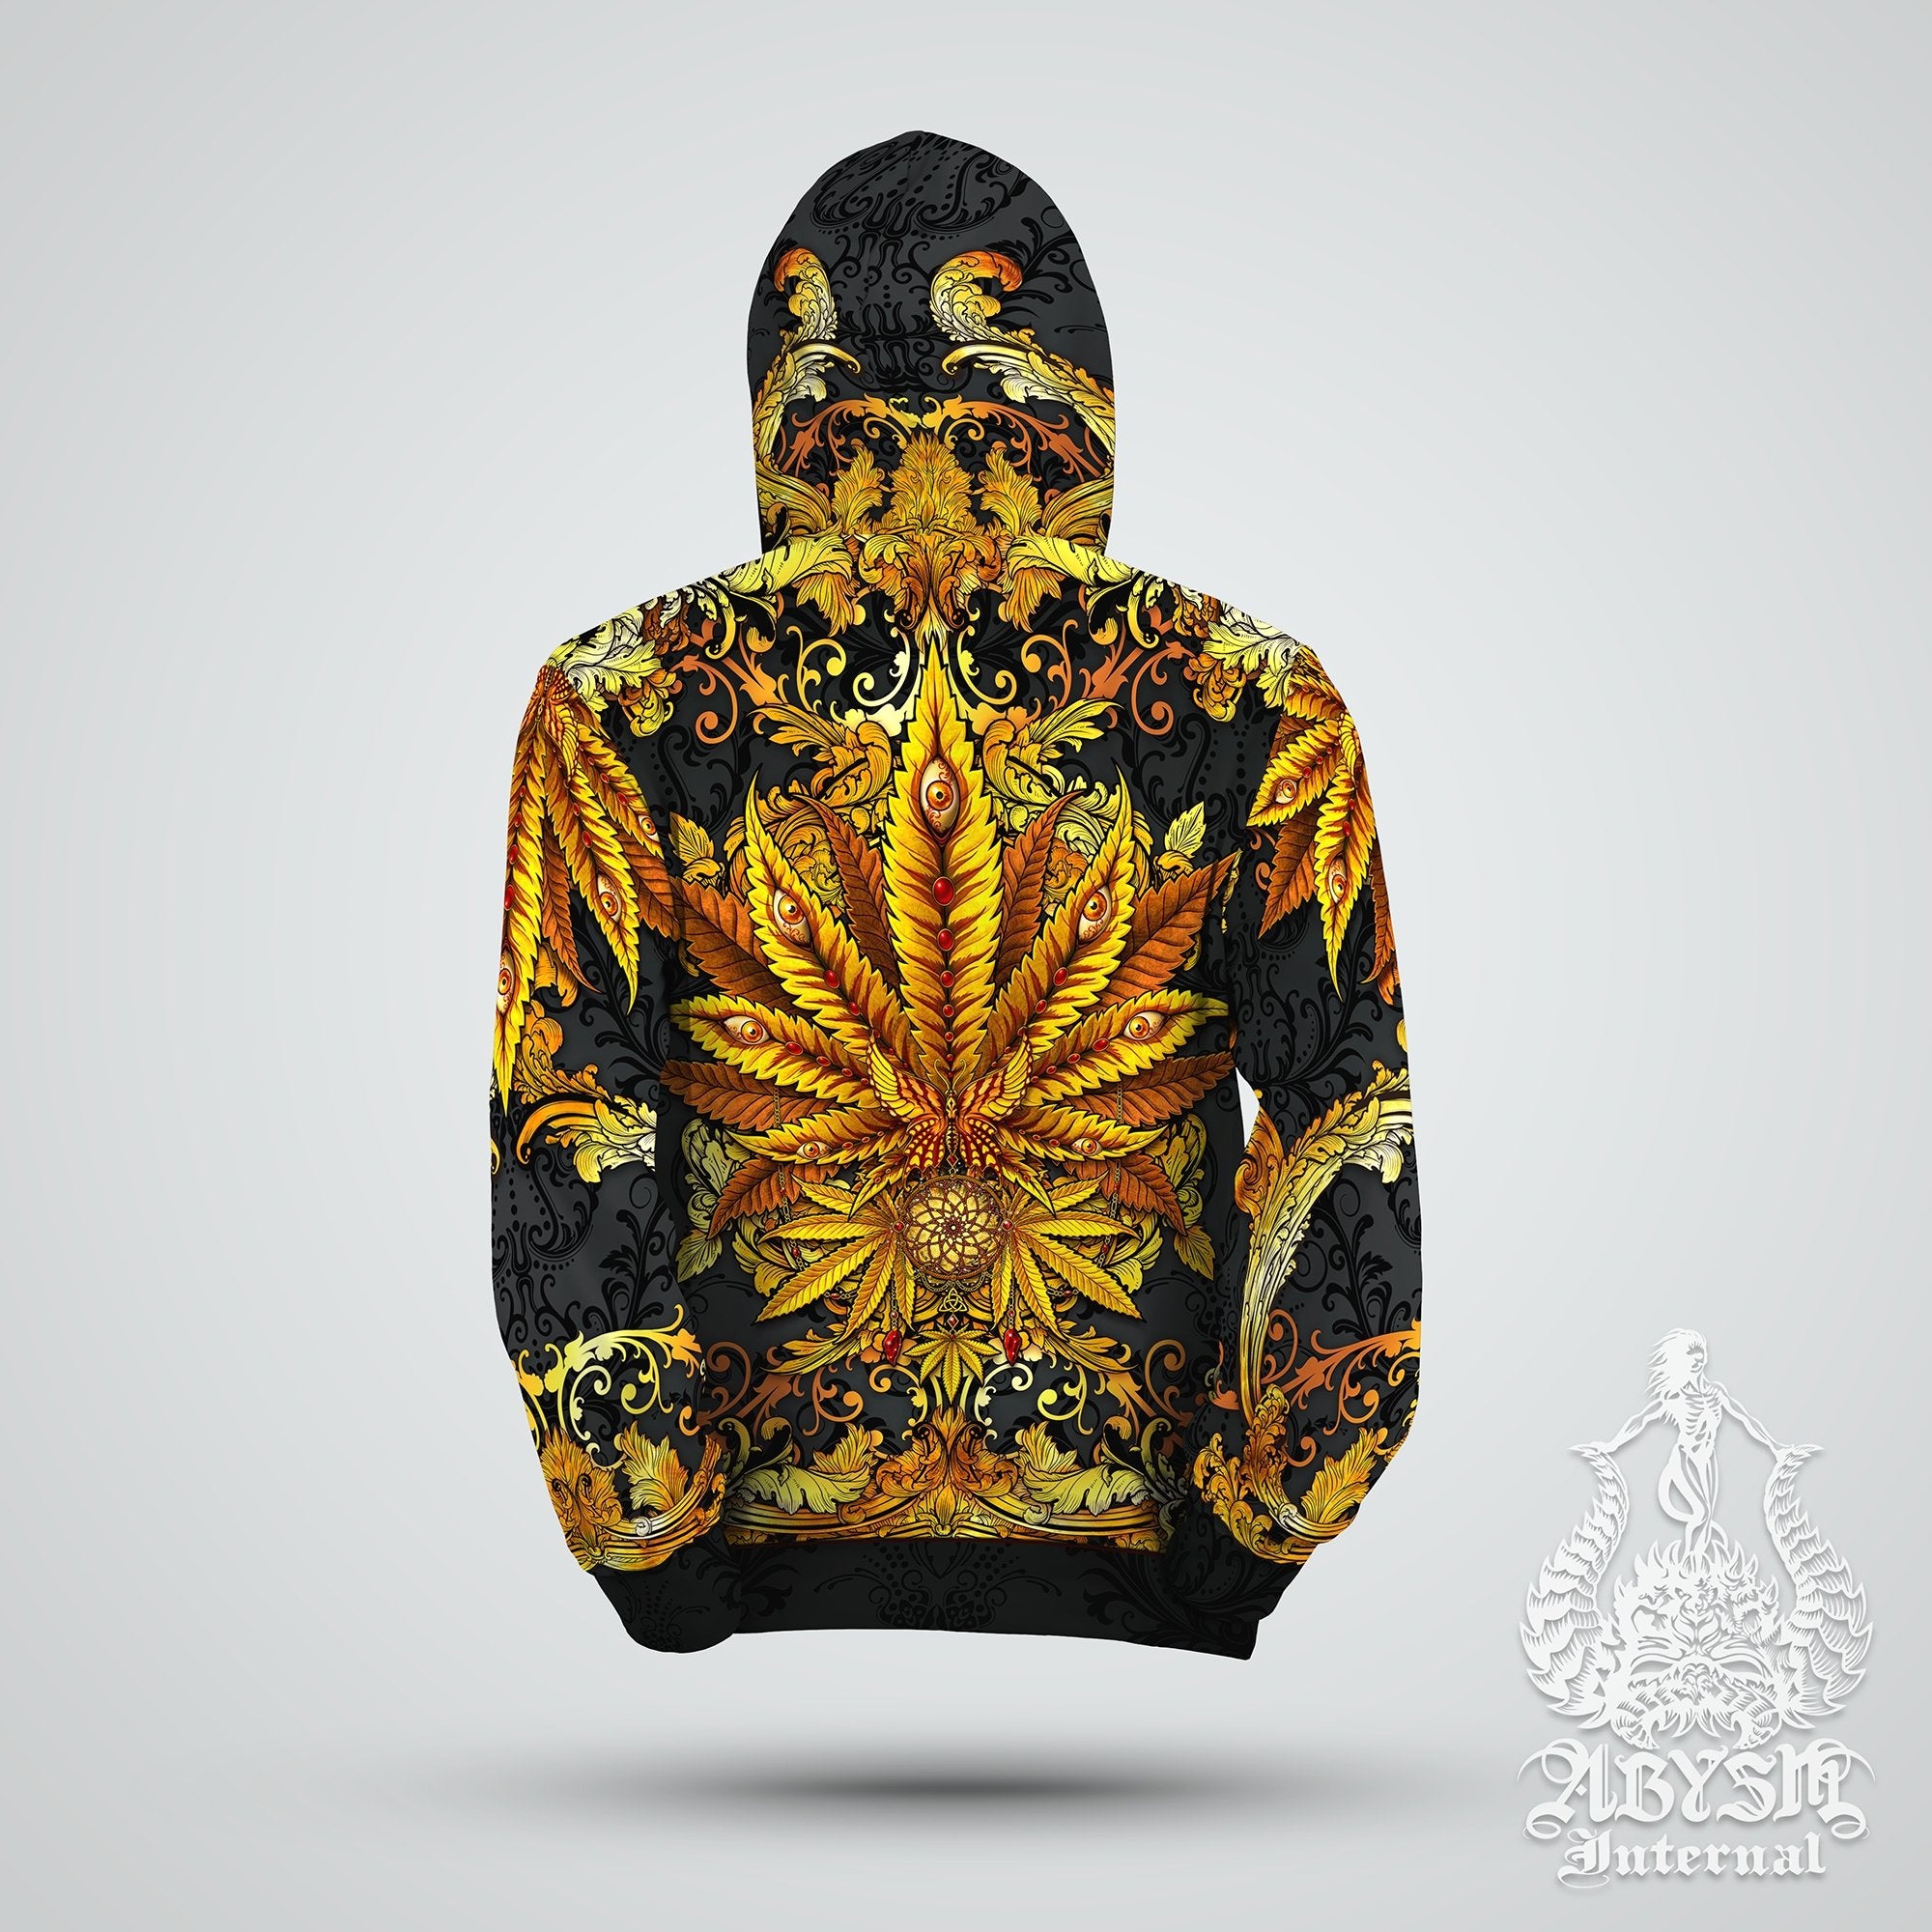 Weed Hoodie, Cannabis Sweater, Hippie Festival Outfit, Trippy Streetwear, Indie and Alternative Clothing, Unisex, 420 Gift - Gold Marijuana - Abysm Internal